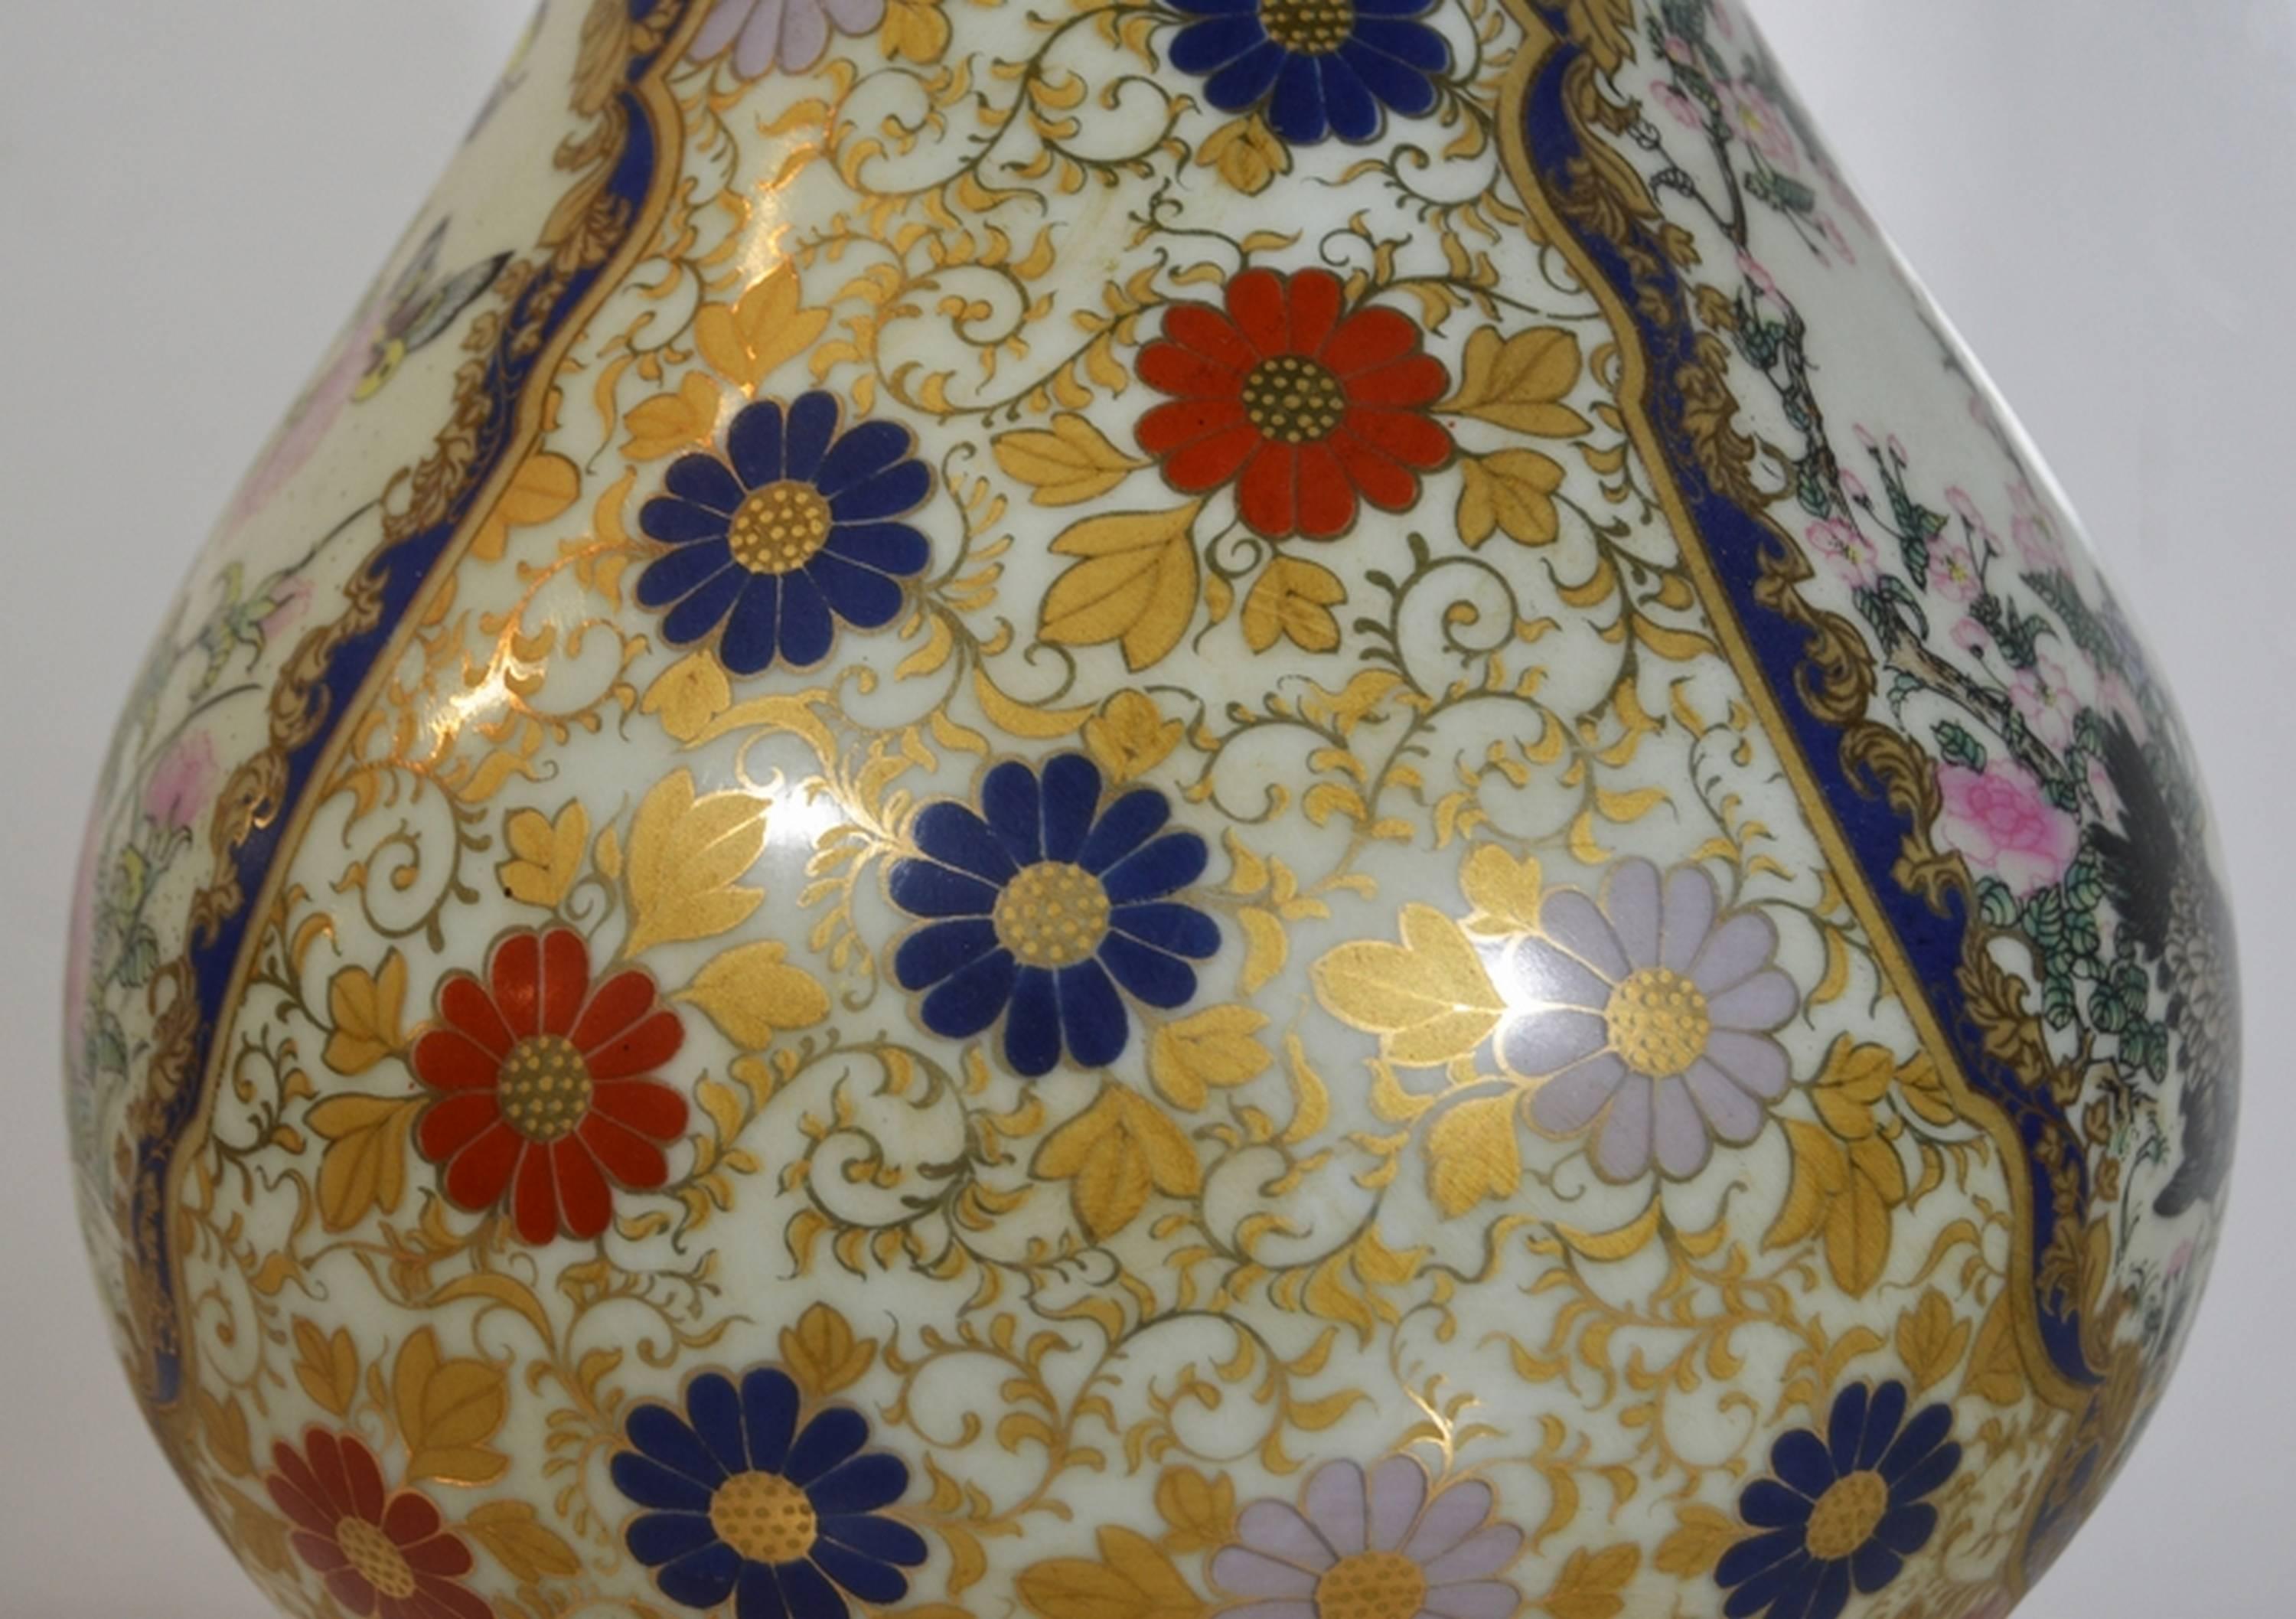 20th Century Vintage Hand-Painted Porcelain Lamp with Various Motifs from China, 1970s For Sale